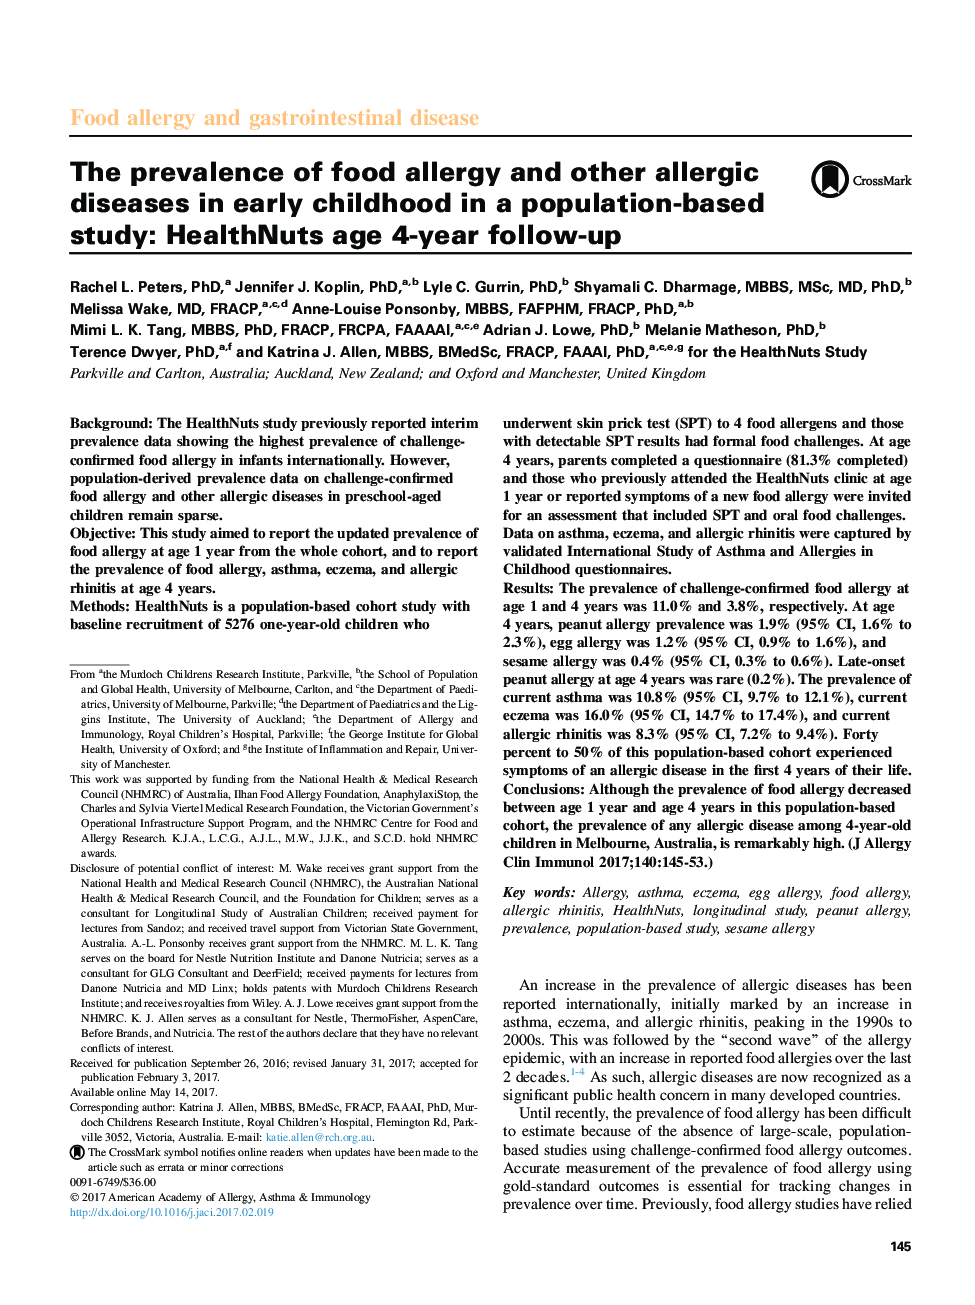 The prevalence of food allergy and other allergic diseases in early childhood in a population-based study: HealthNuts age 4-year follow-up